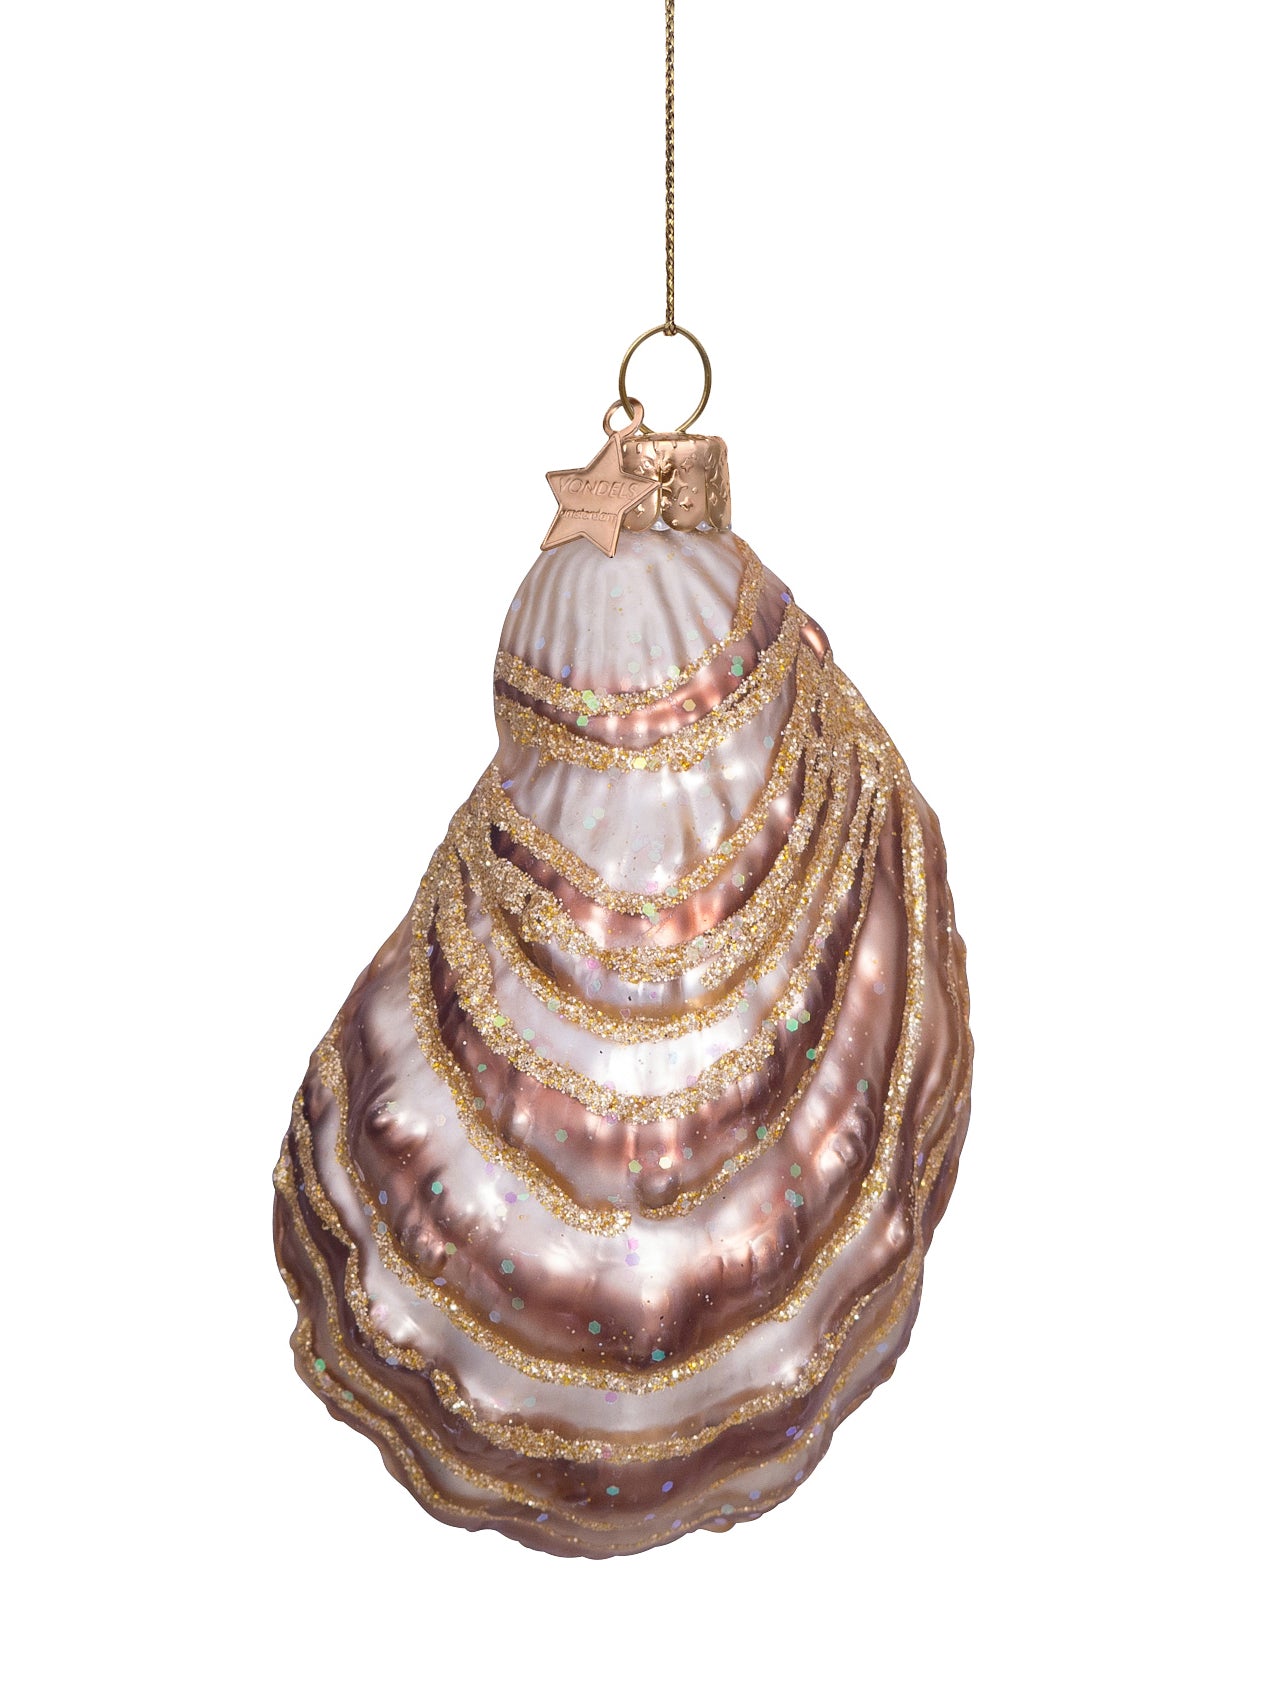 Oyster glass ornament